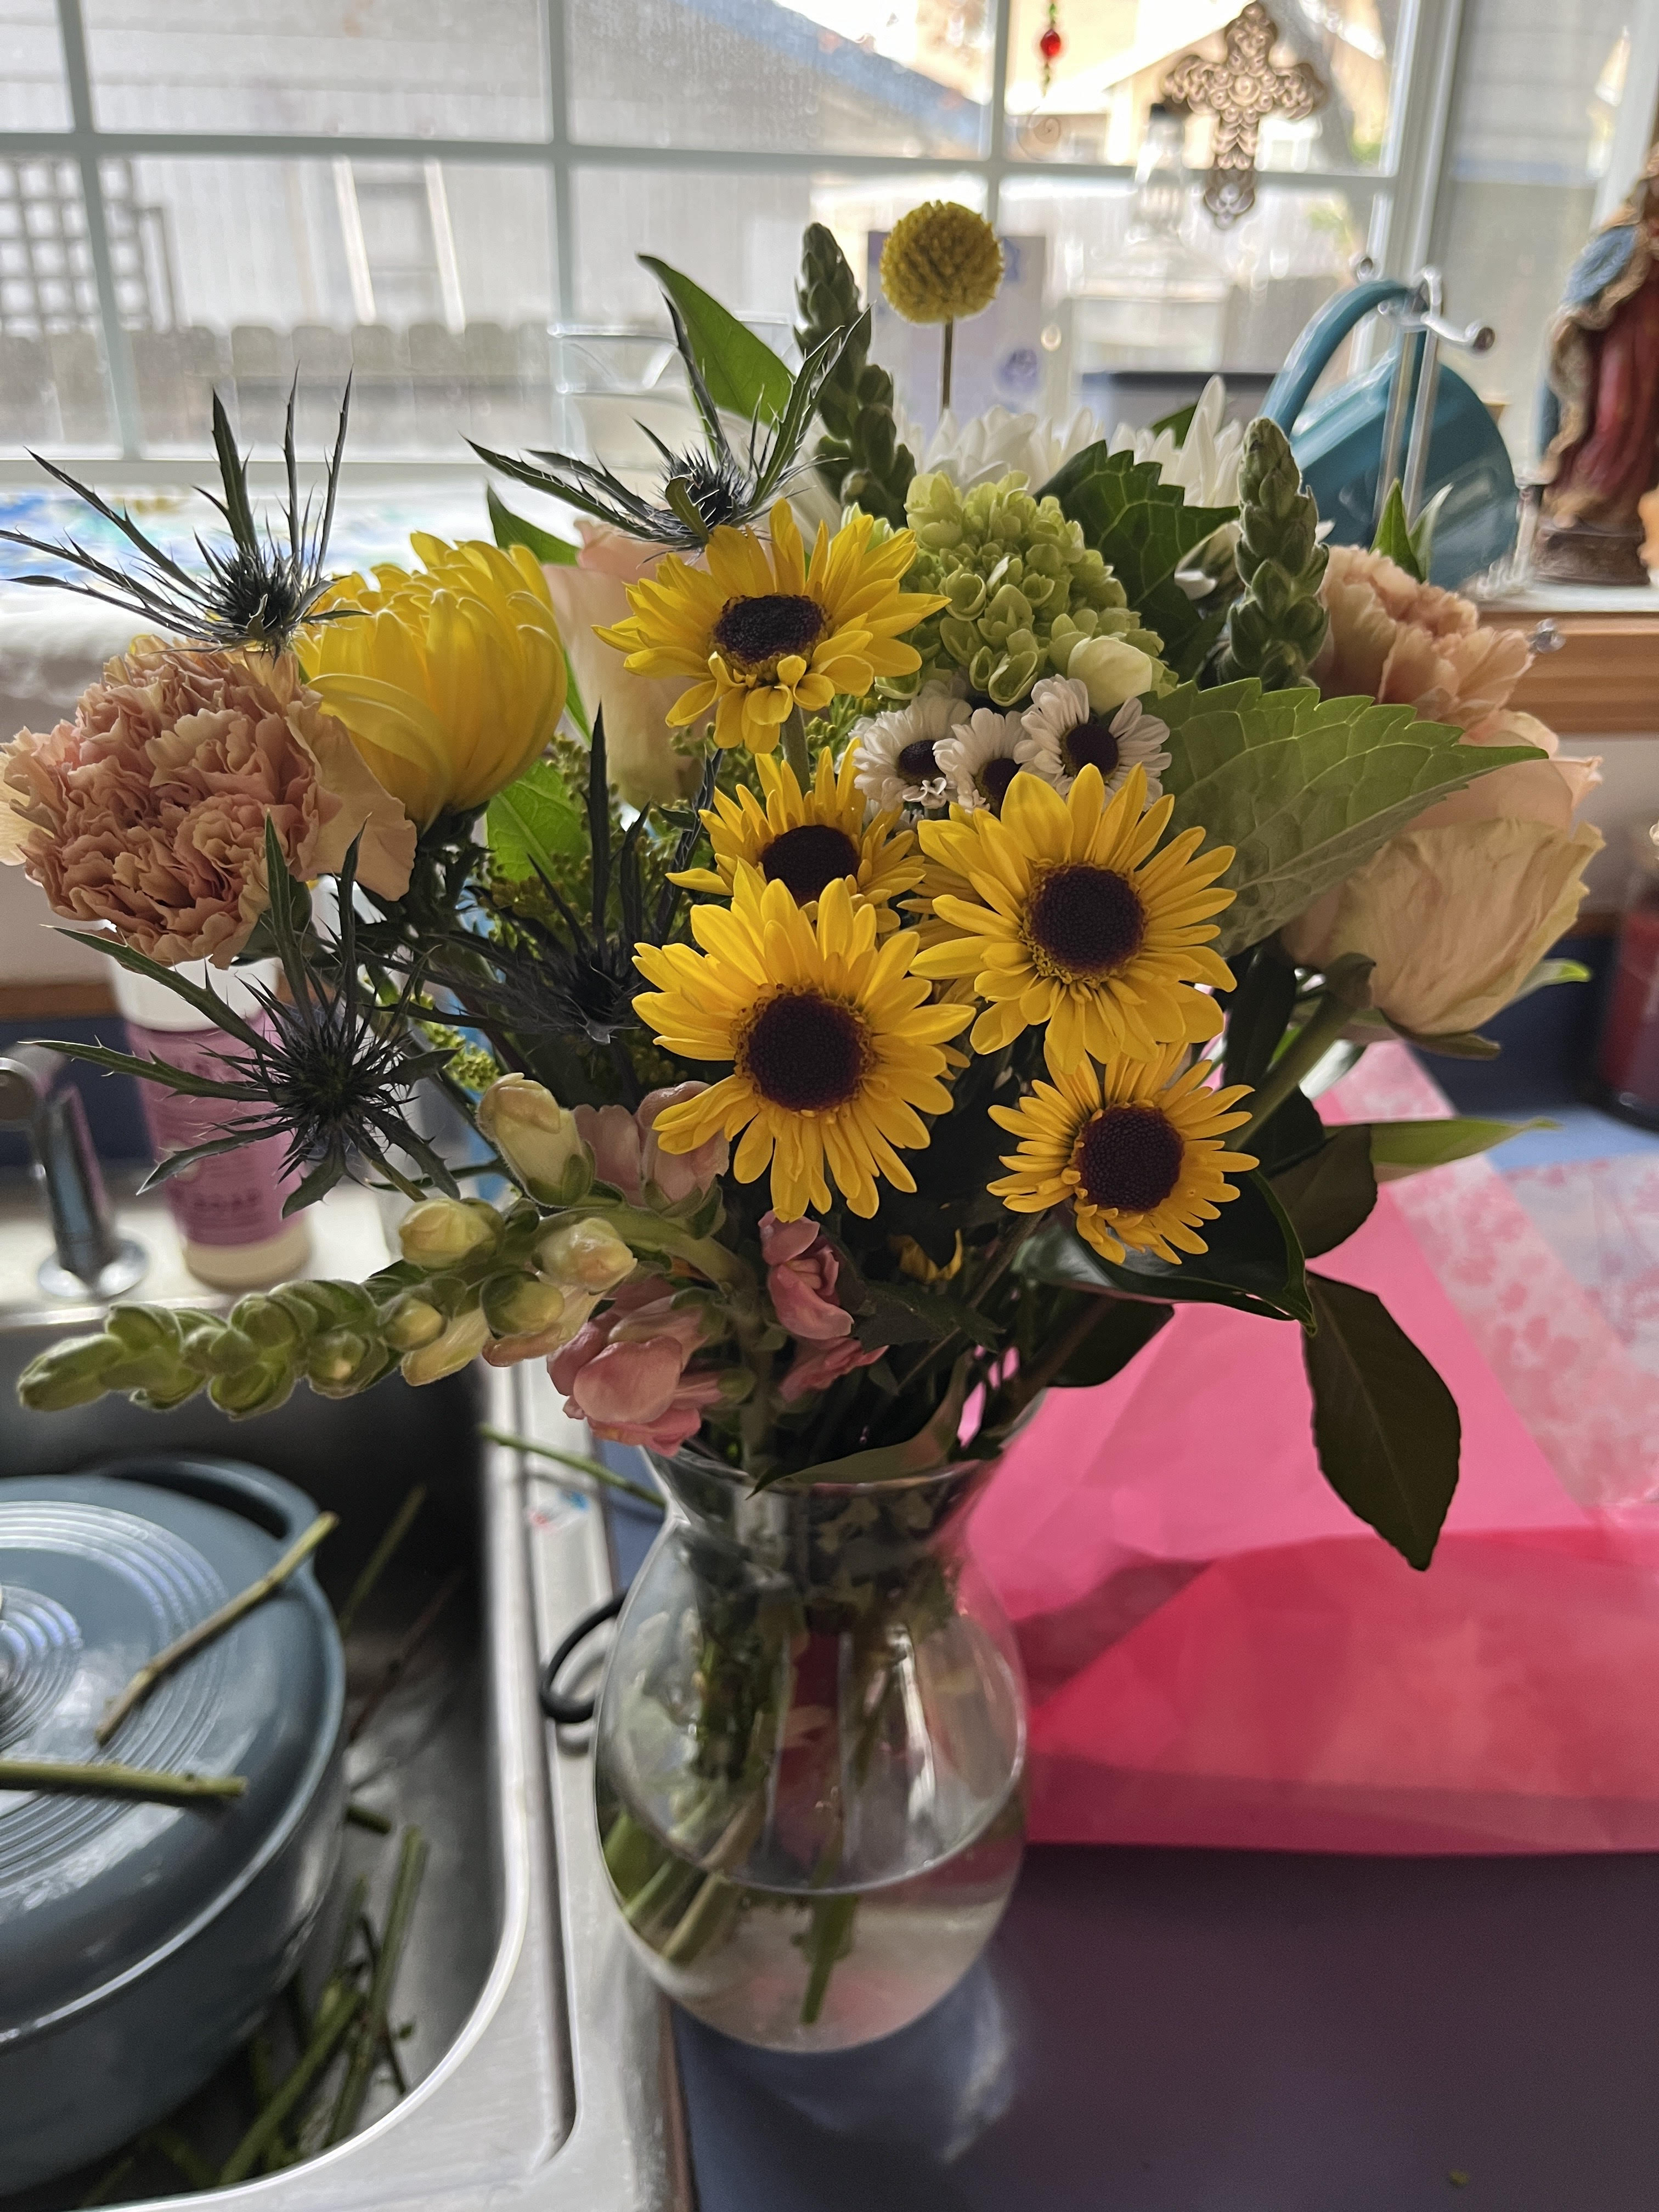 A picture of a bouquet of flowers in a vase sitting on the kitchen counter